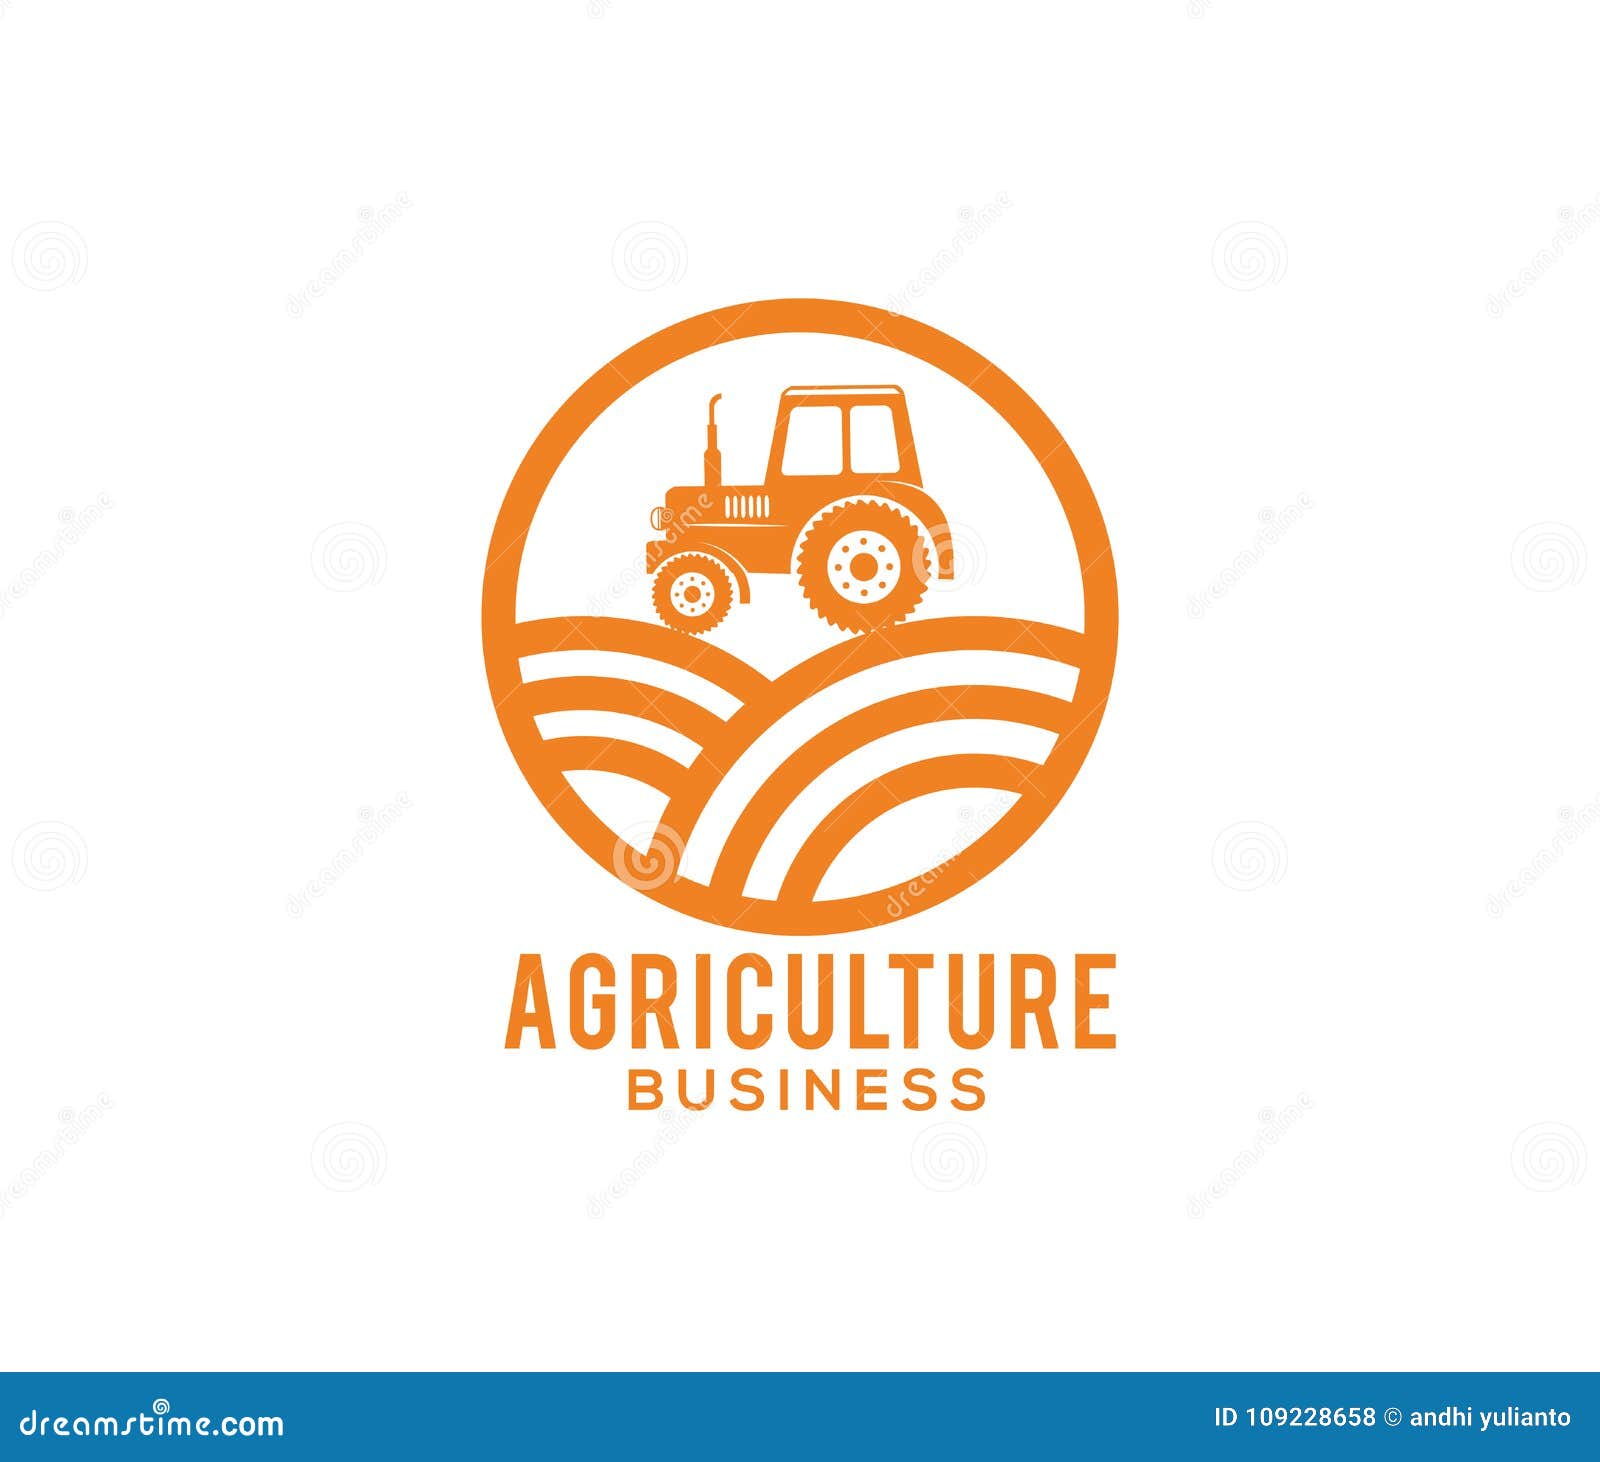 Vector Logo Design and Illustration of Agriculture Business, Company ...